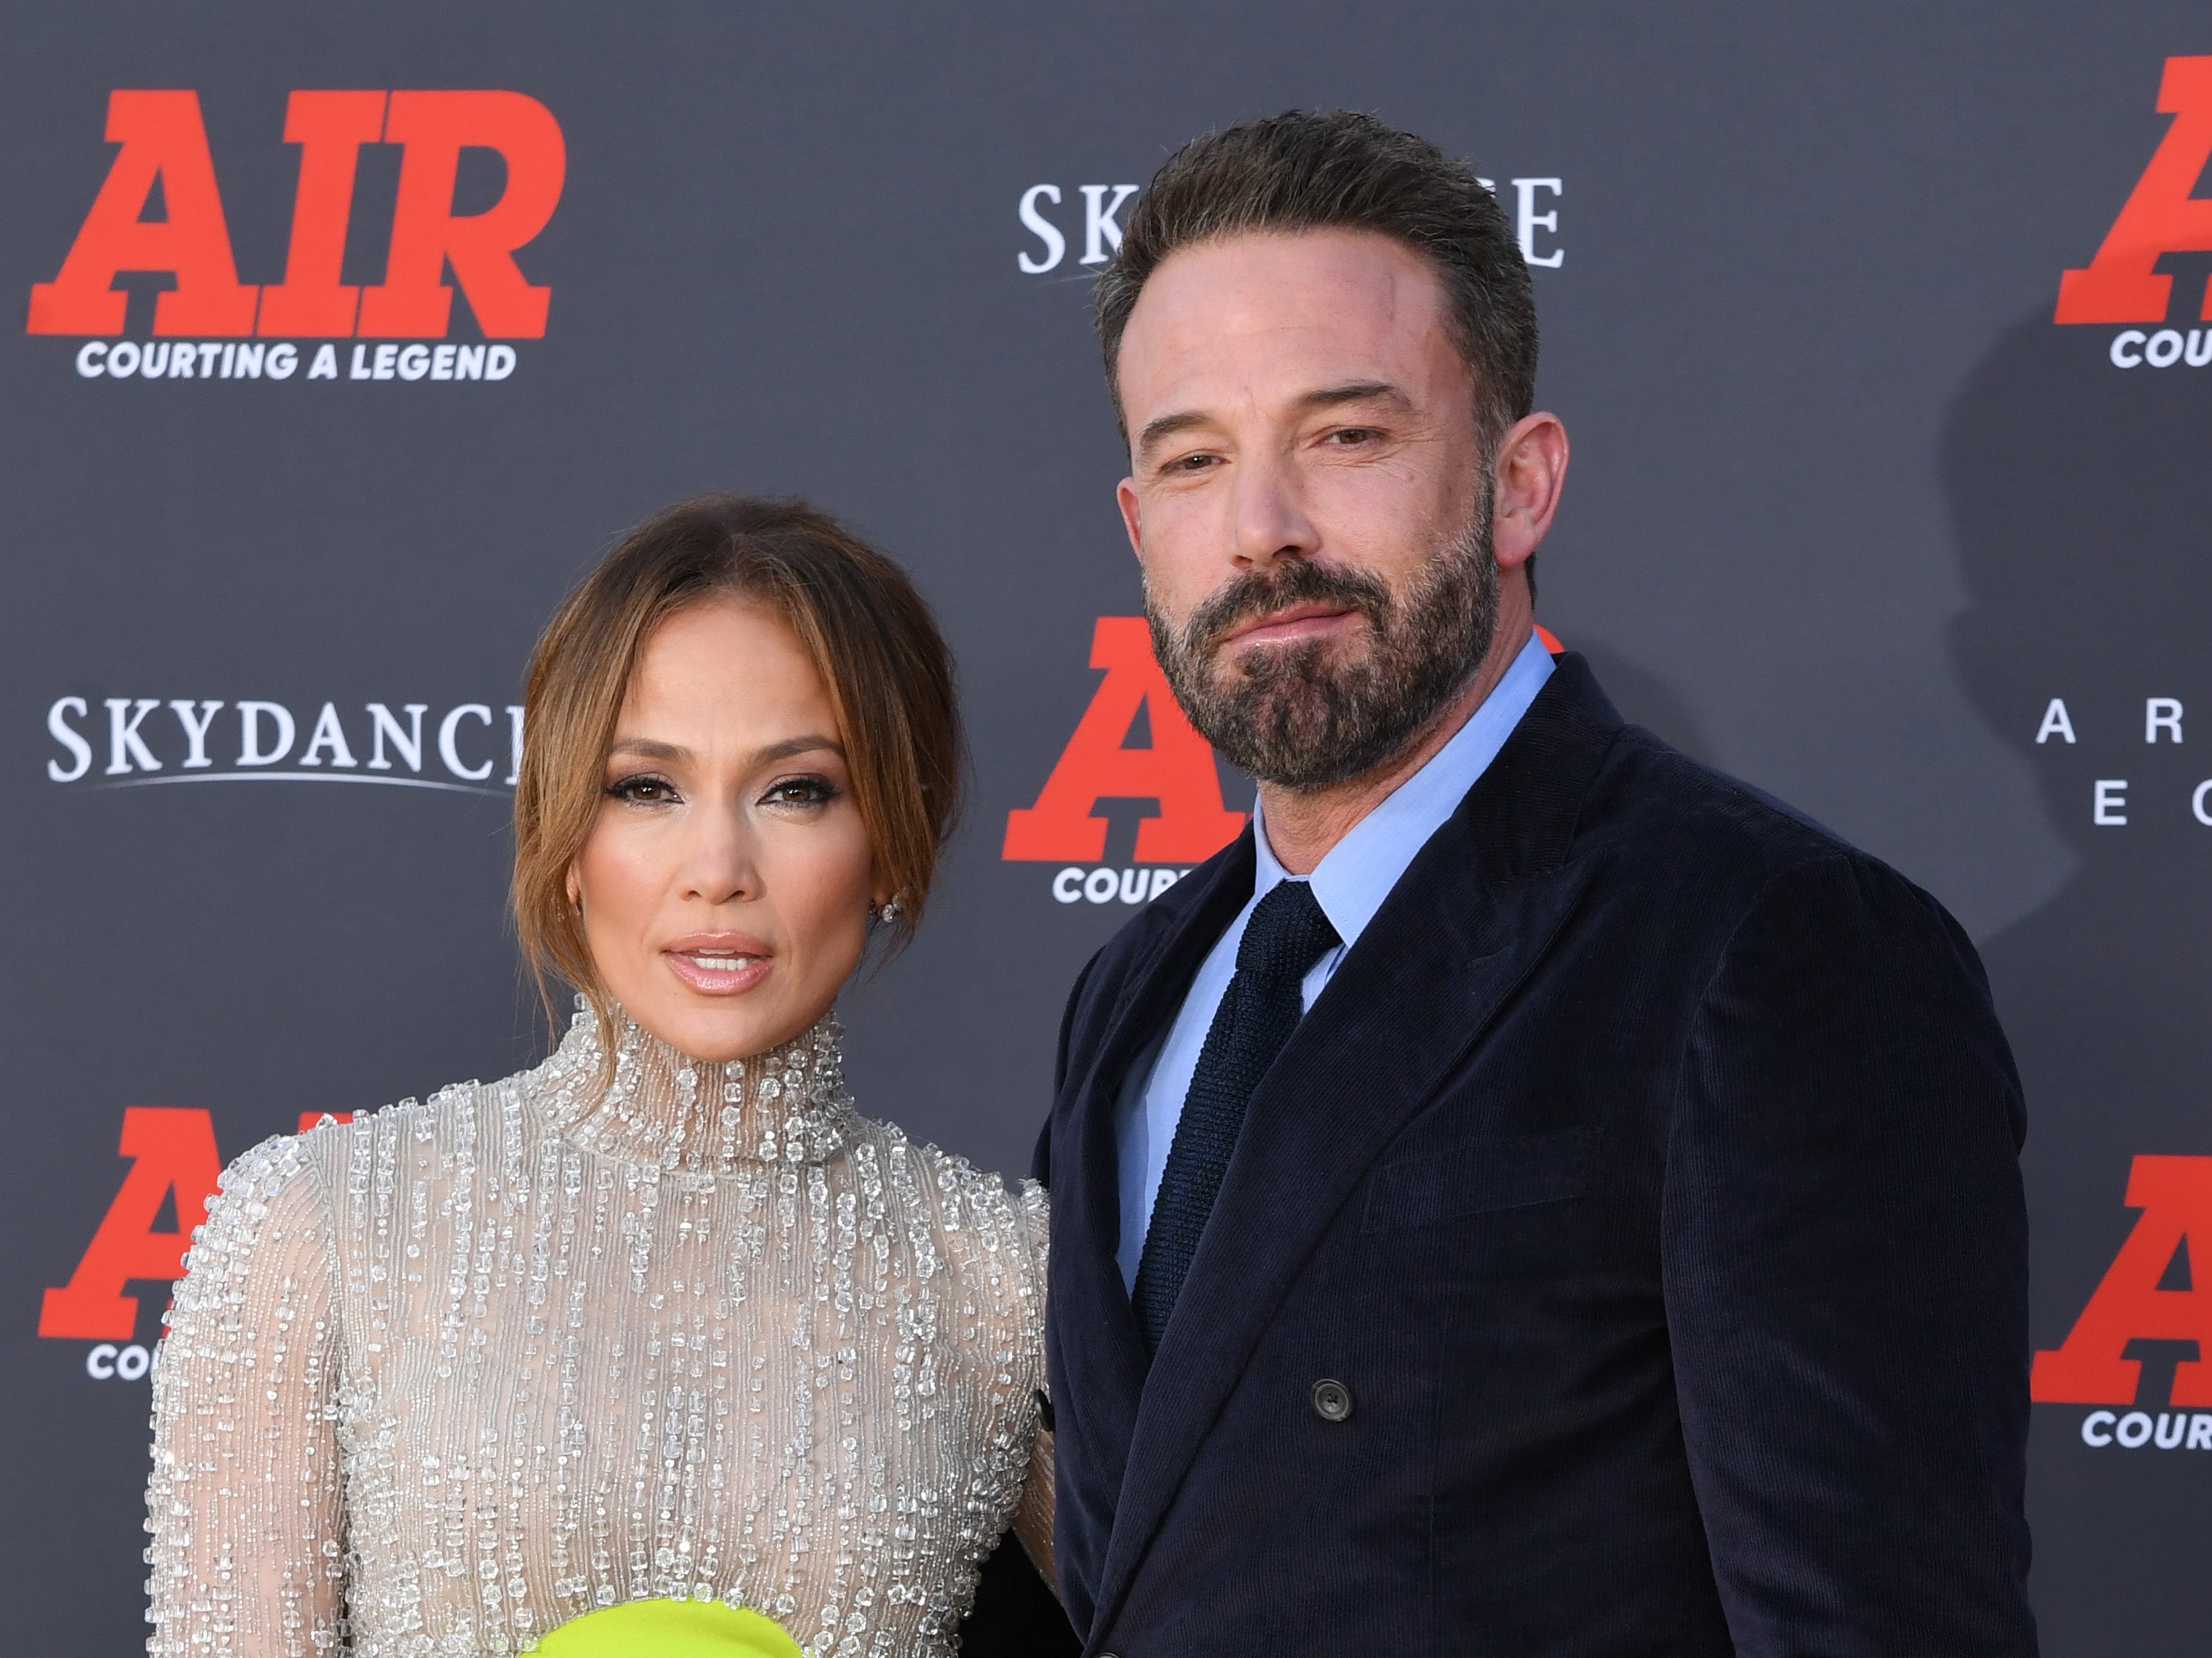 Jennifer Lopez and Ben Affleck attend Amazon Studios' World Premiere Of ‘AIR’ at Regency Village Theatre on March 27, 2023 in Los Angeles, California